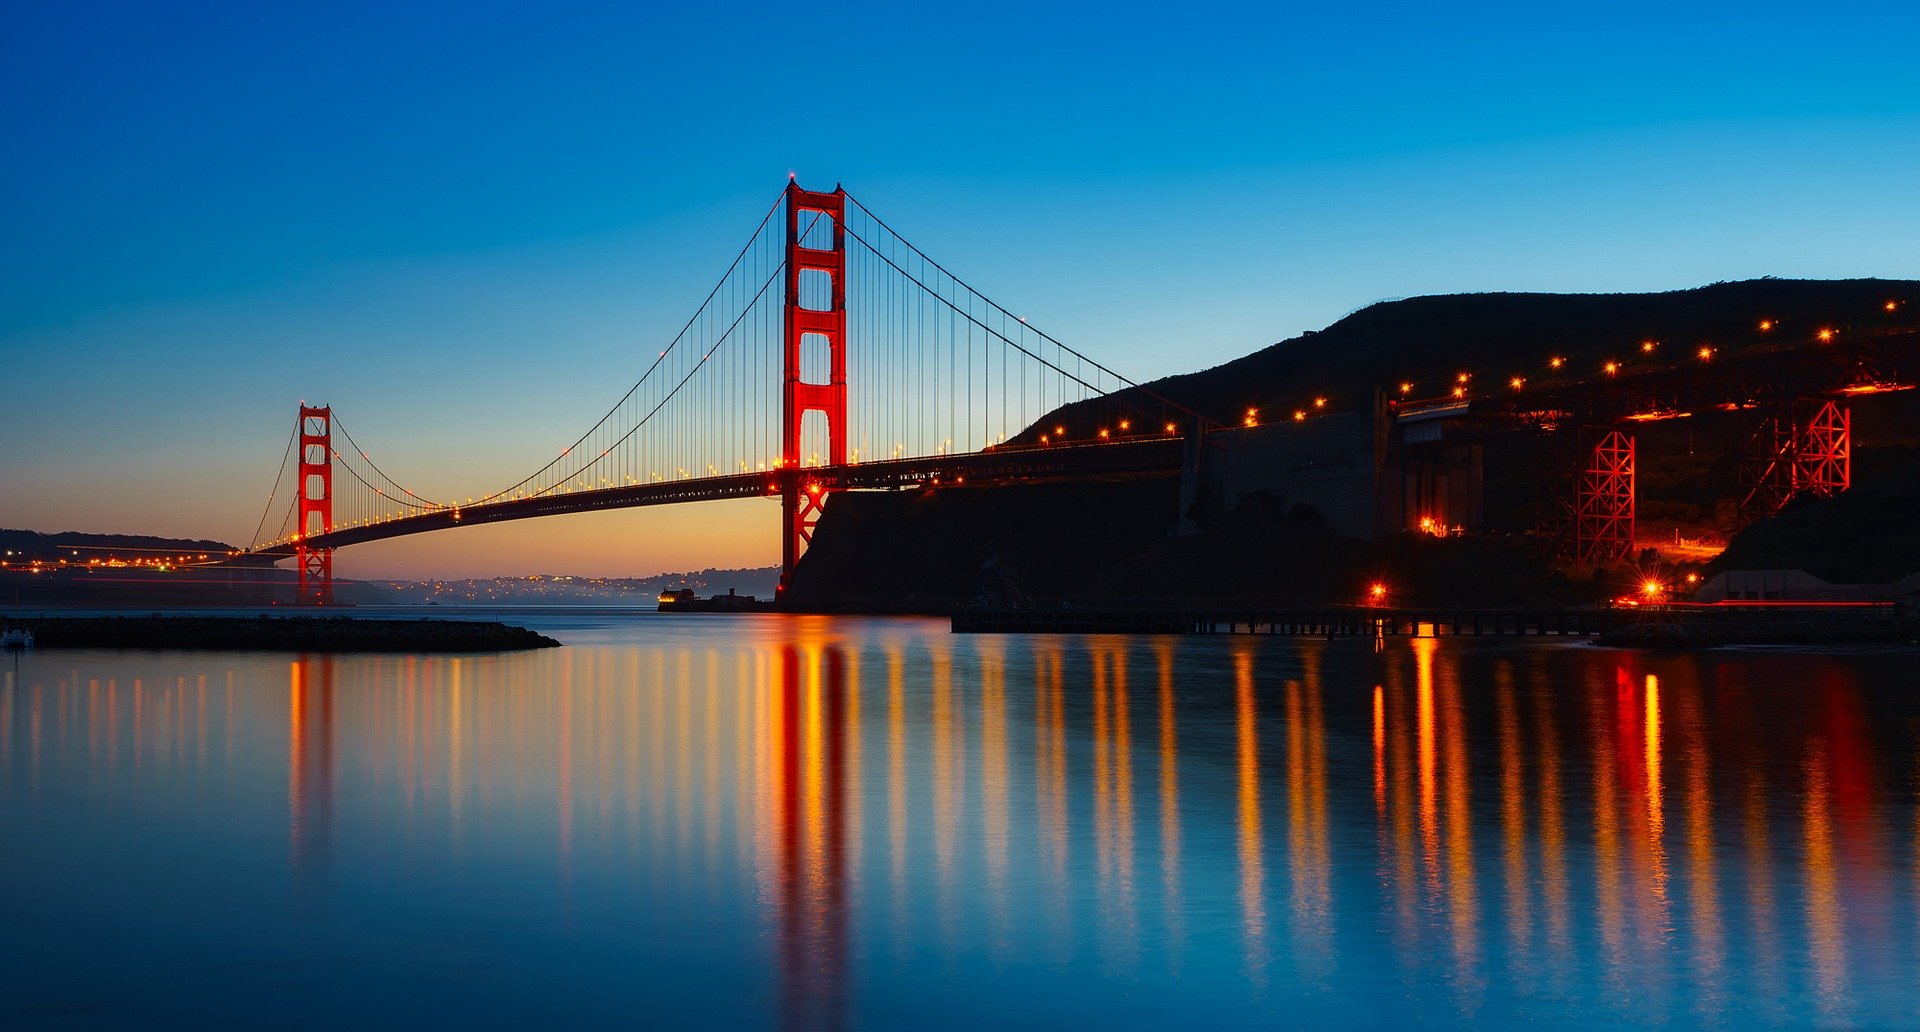 The golden gate bridge in San Franciso at night